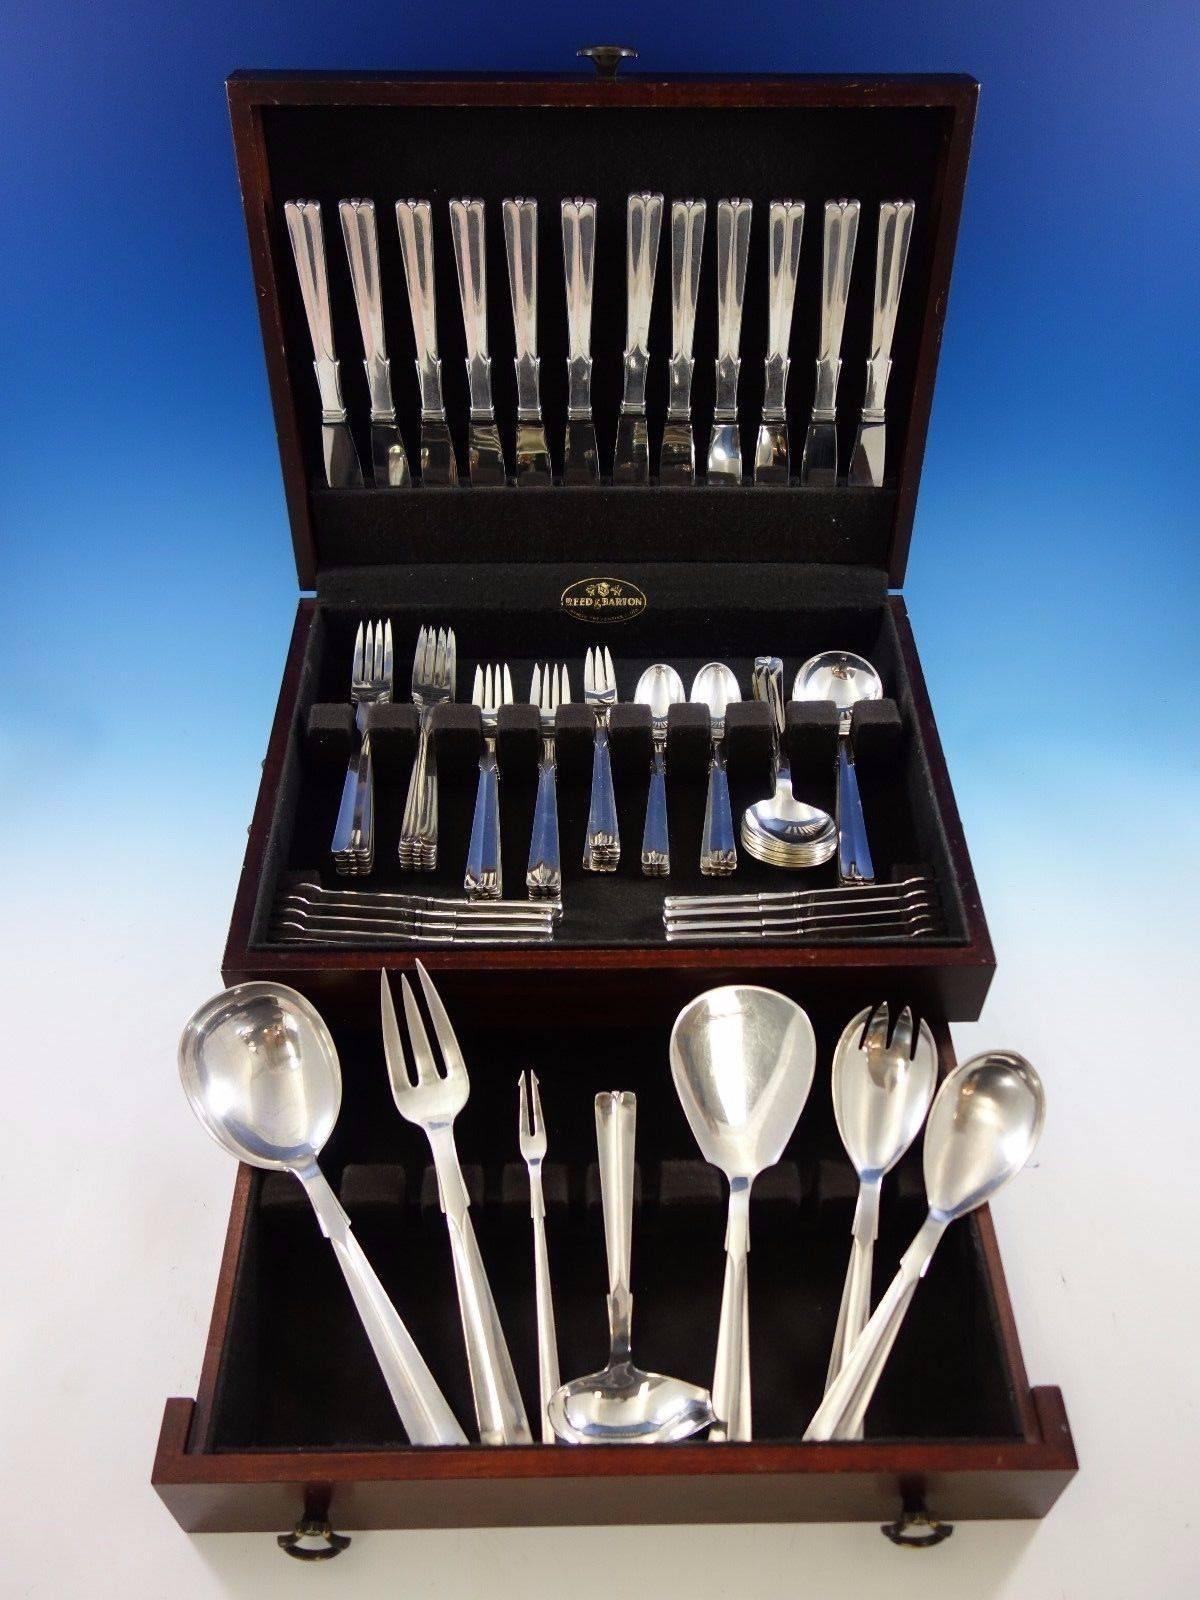 Baronet aka Arvesolv #7 by Hans Hansen Danish sterling silver flatware set - 91 pieces. This set includes: 

12 dinner knives, 9 1/4